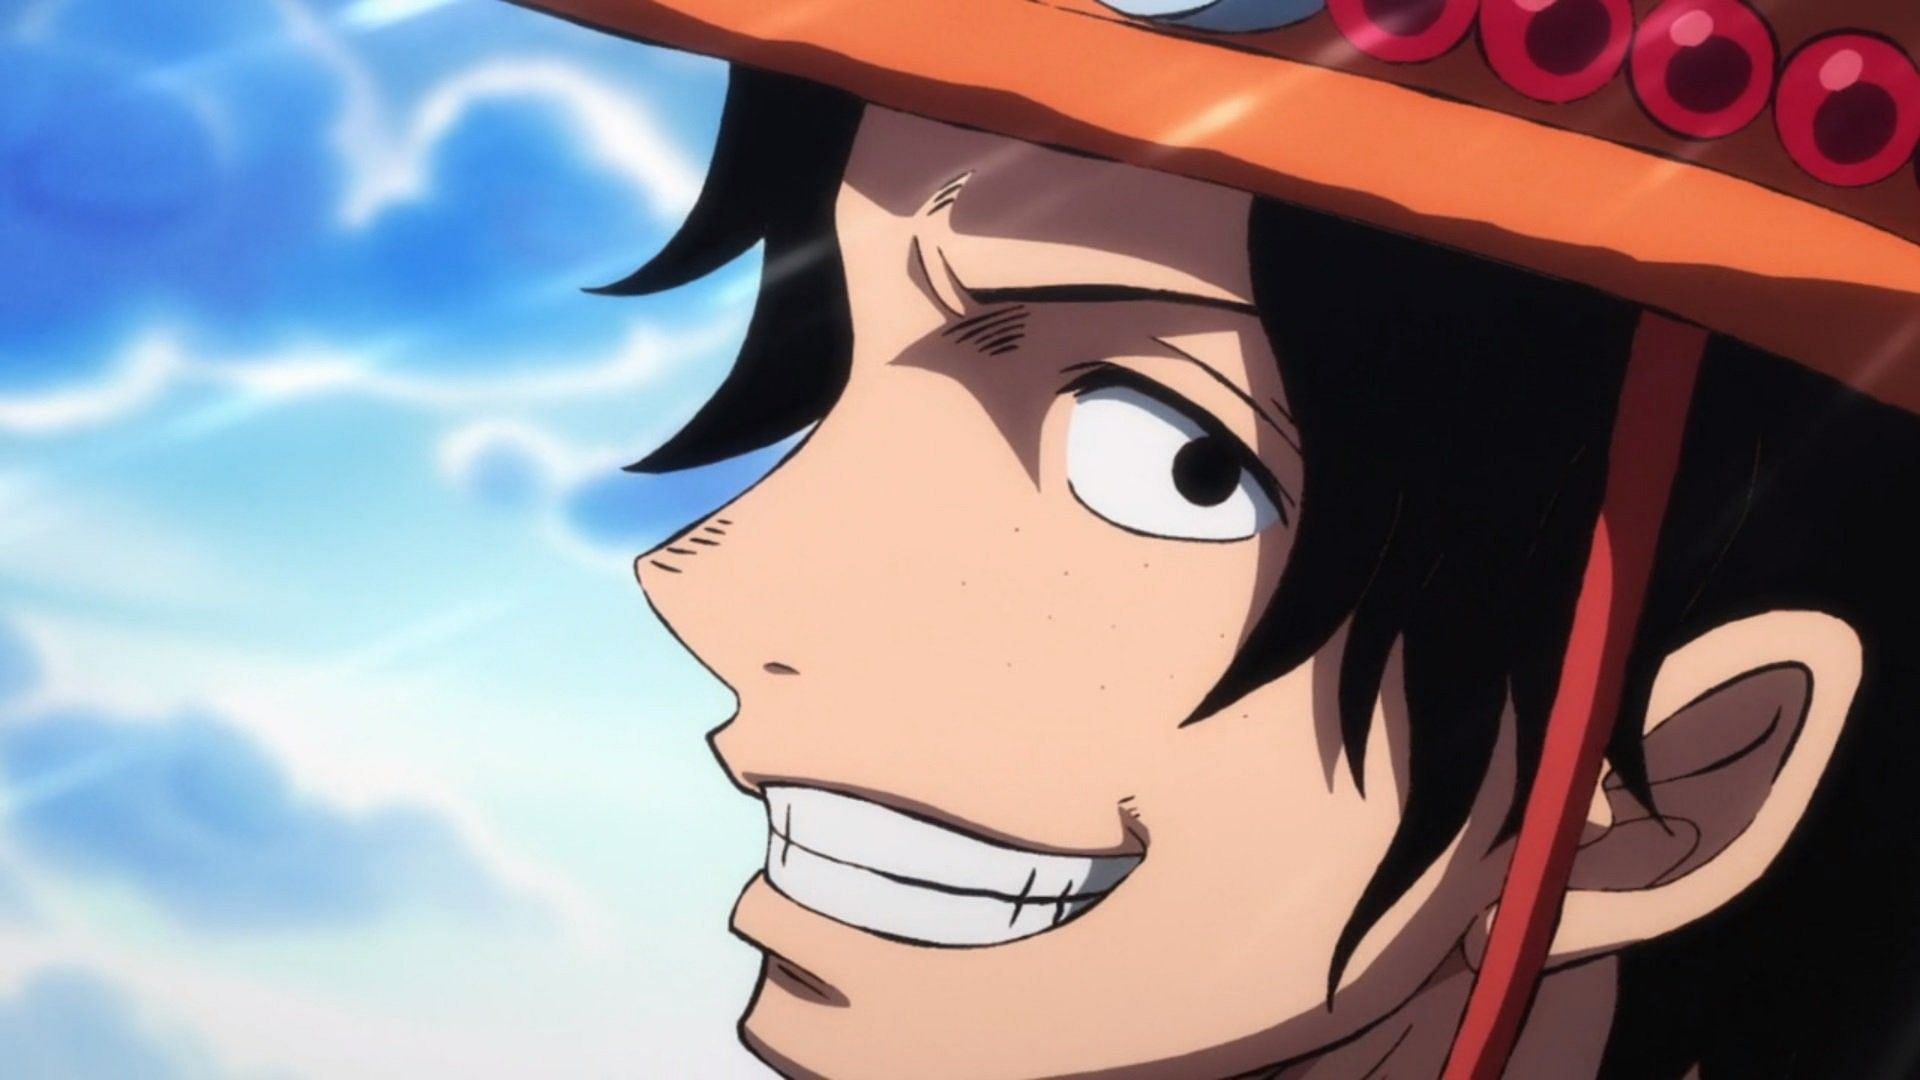 Ace makes a triumphant cameo return in One Piece Episode 1013 (Image via Toei Animation)